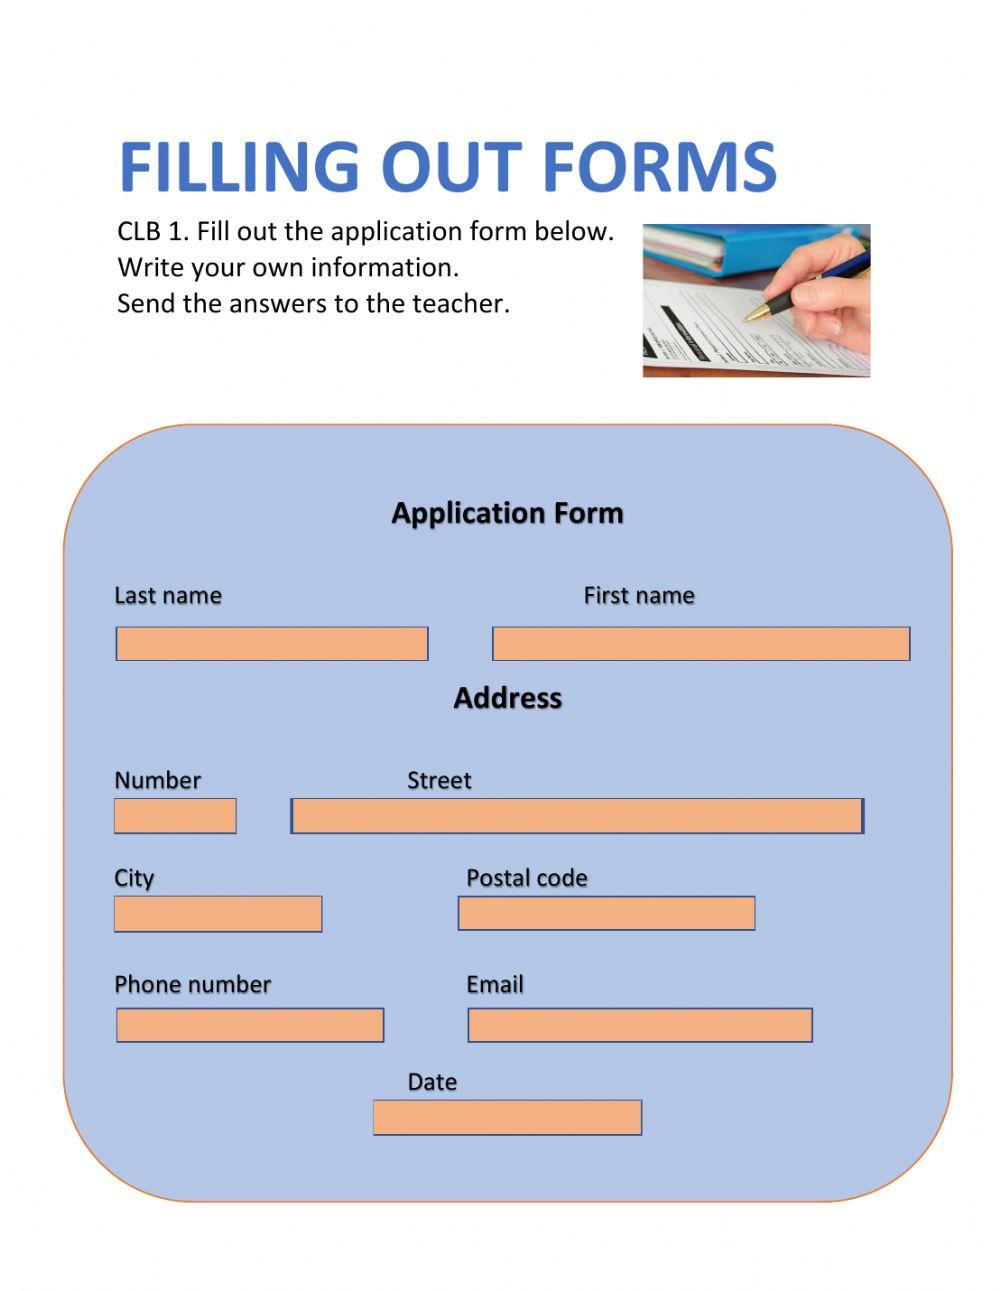 Fill out a form (CLB 1) test Apr 2021